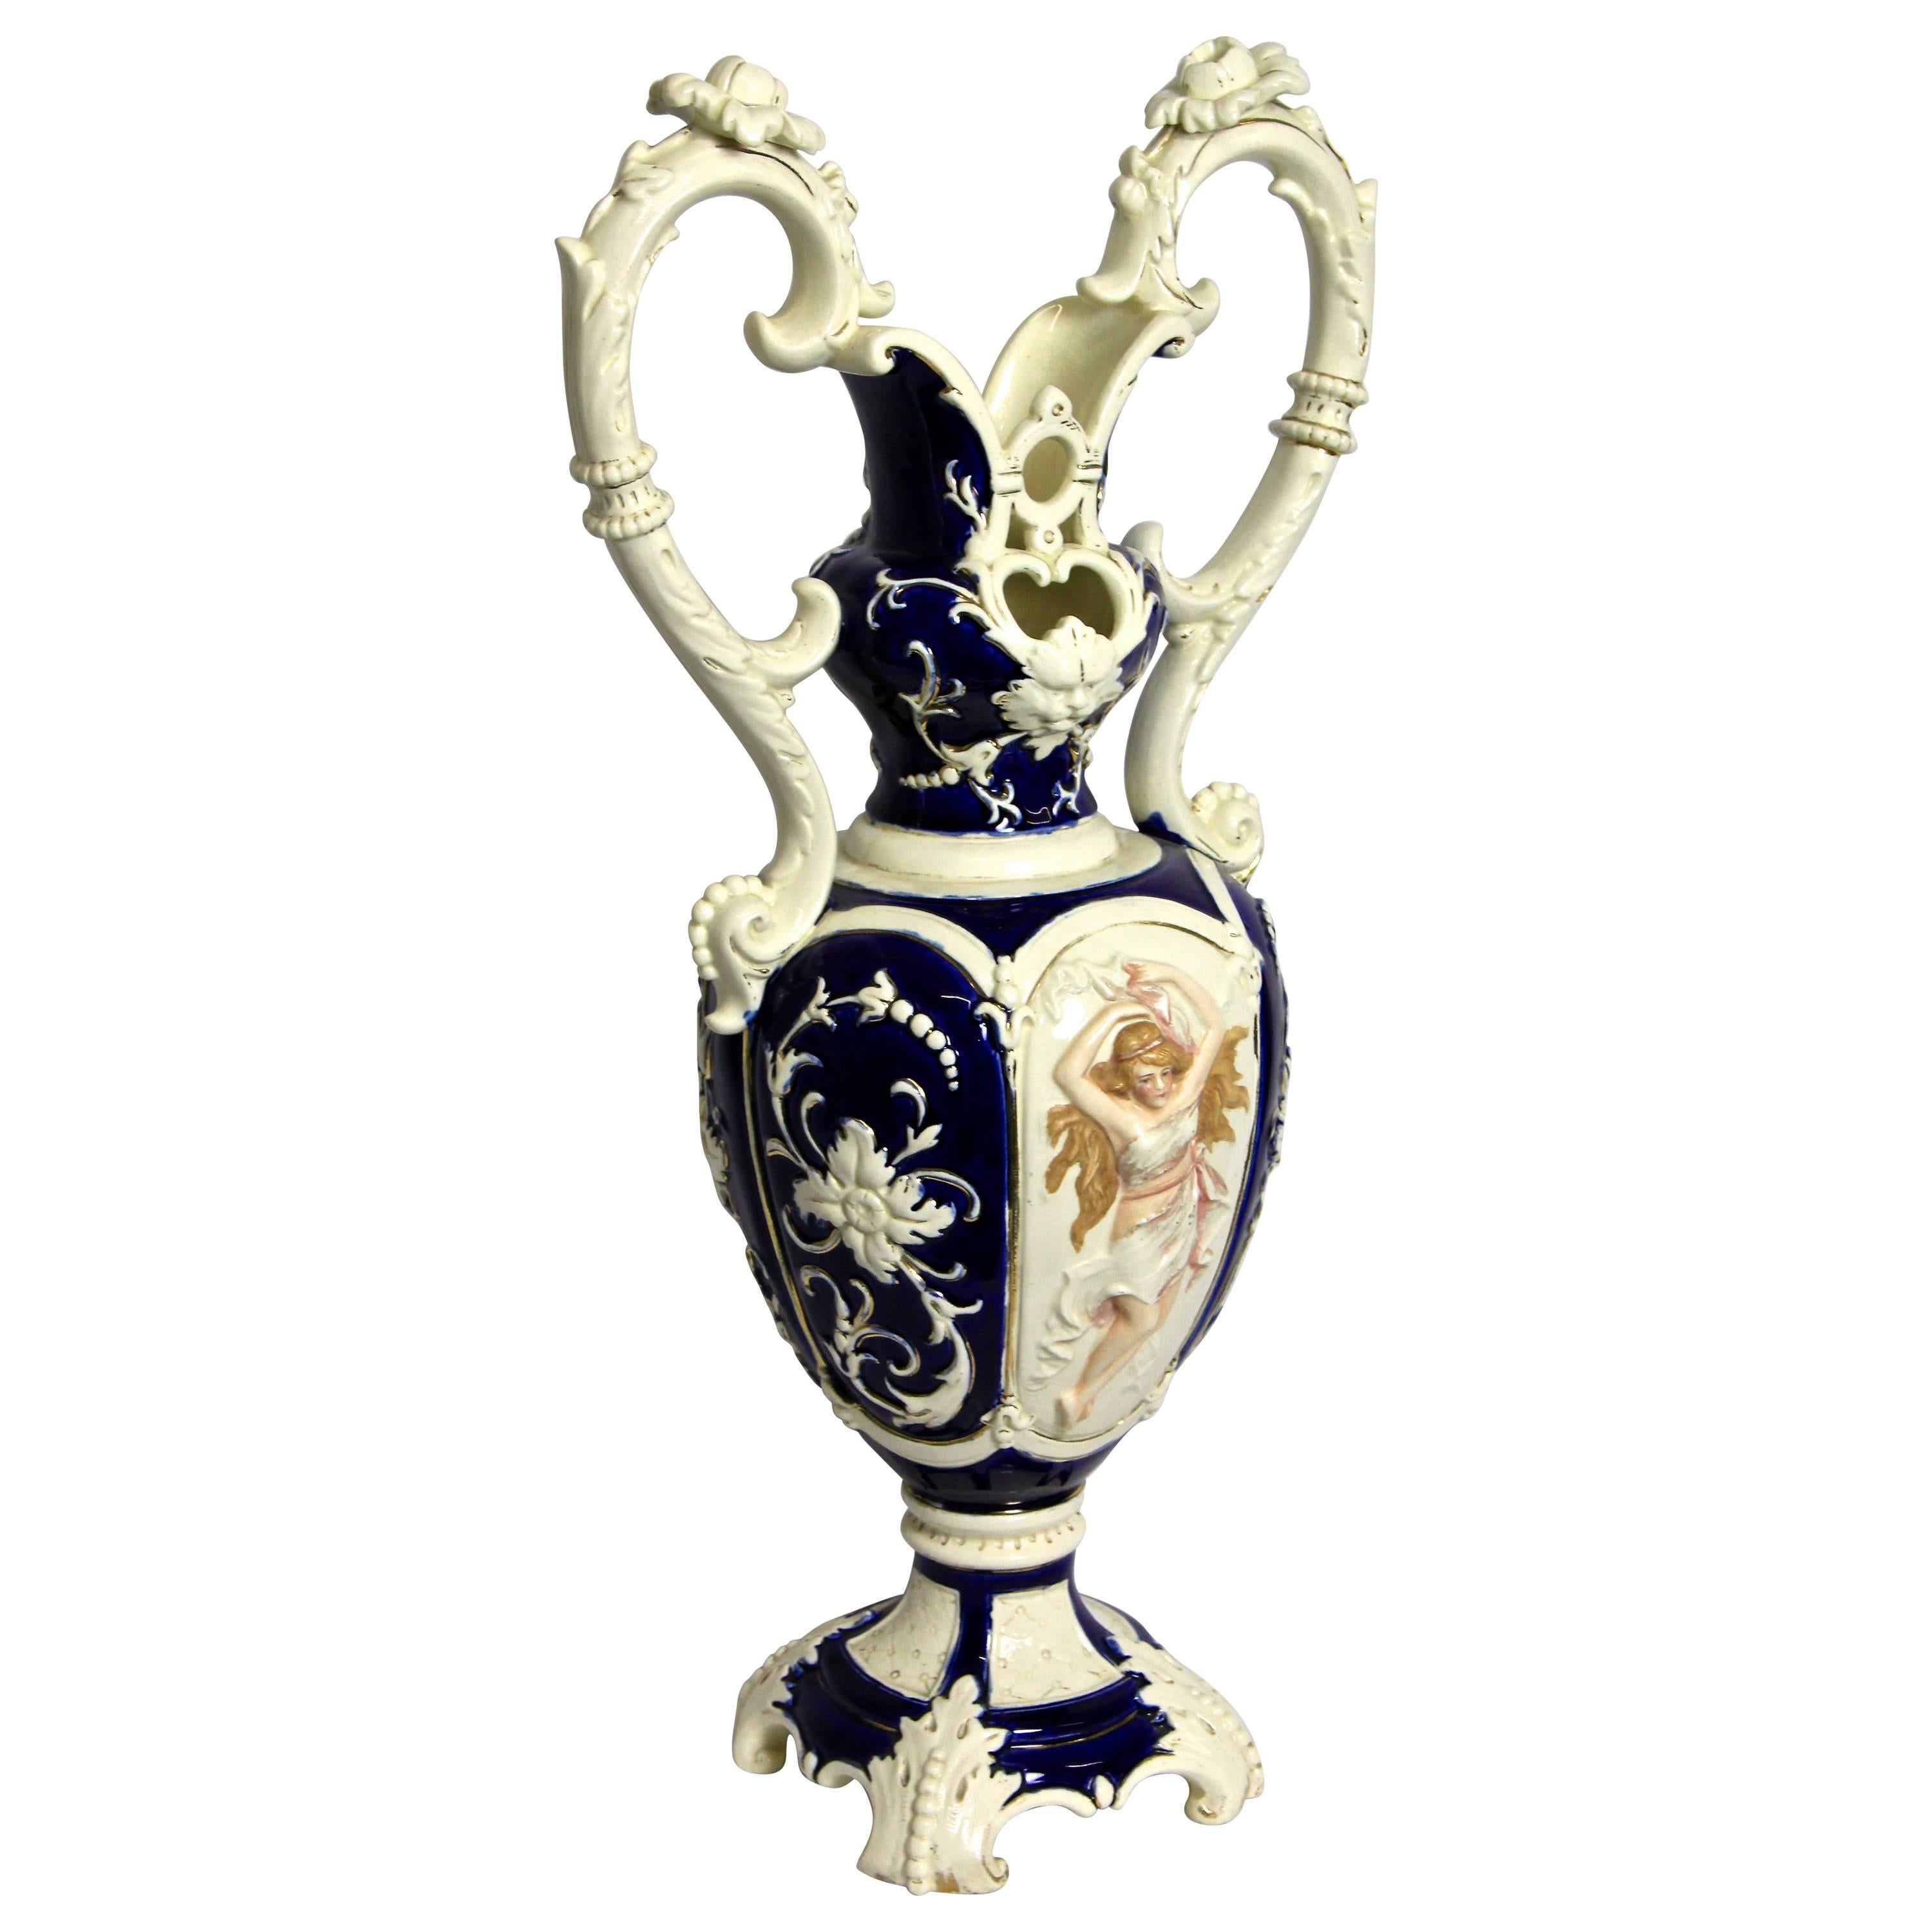 Remarkable Majolica vase from the renown manufactory of Eichwald in Bohemia, circa 1895. This elaborately processed late 19th century rare cobalt blue vase is a so-called 